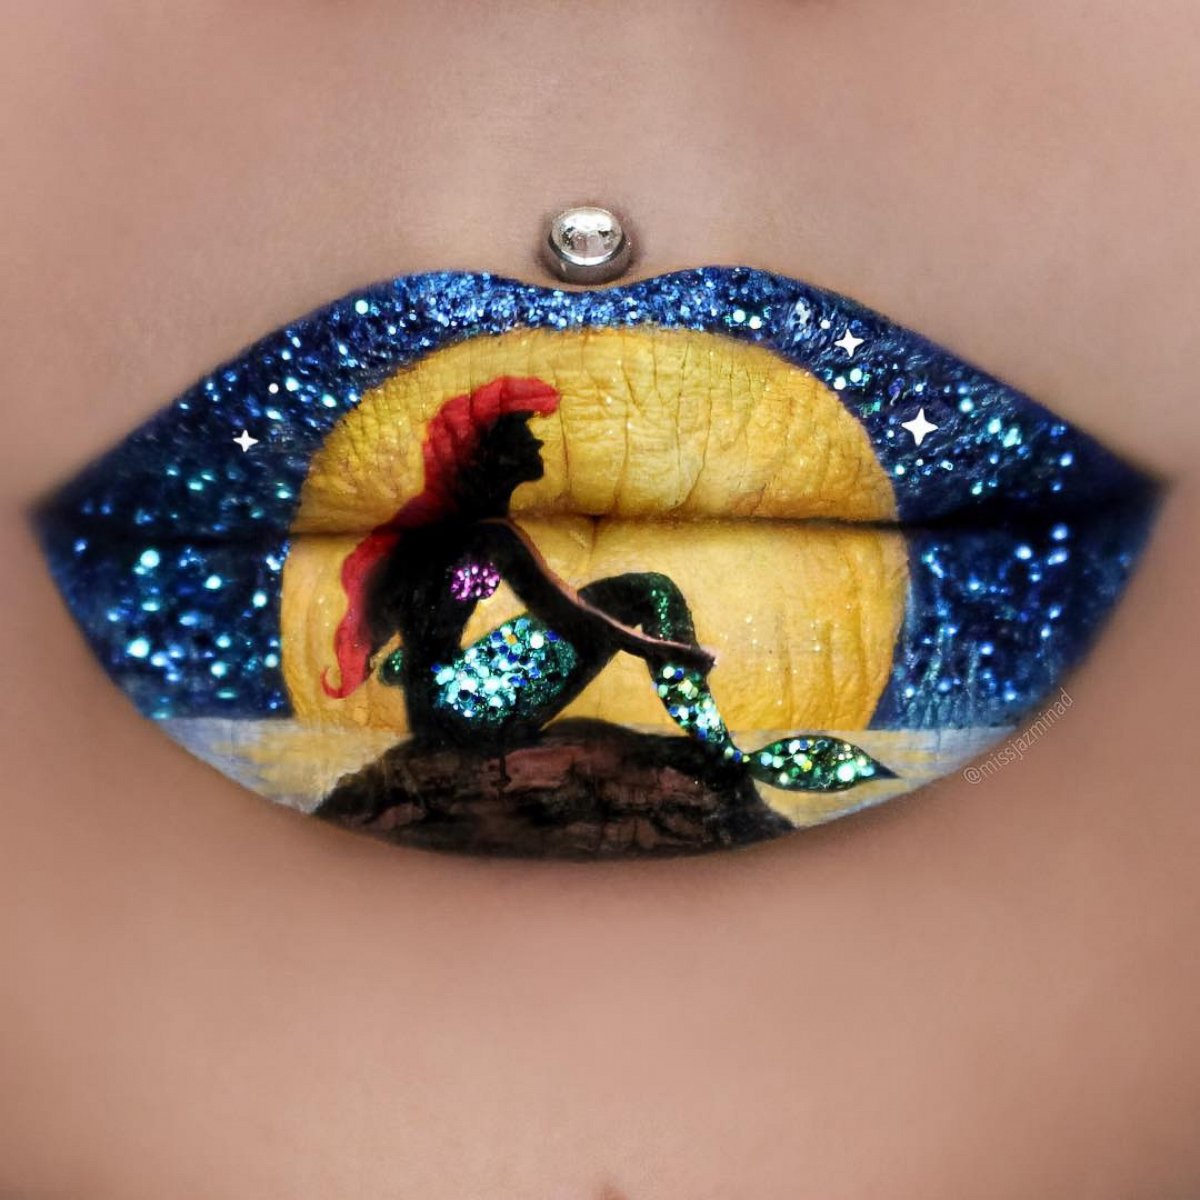 PHOTO: Make-Up Artist’s Whimsical Lip Art Was ‘Stress Reliever’ While Fighting Brain Tumor